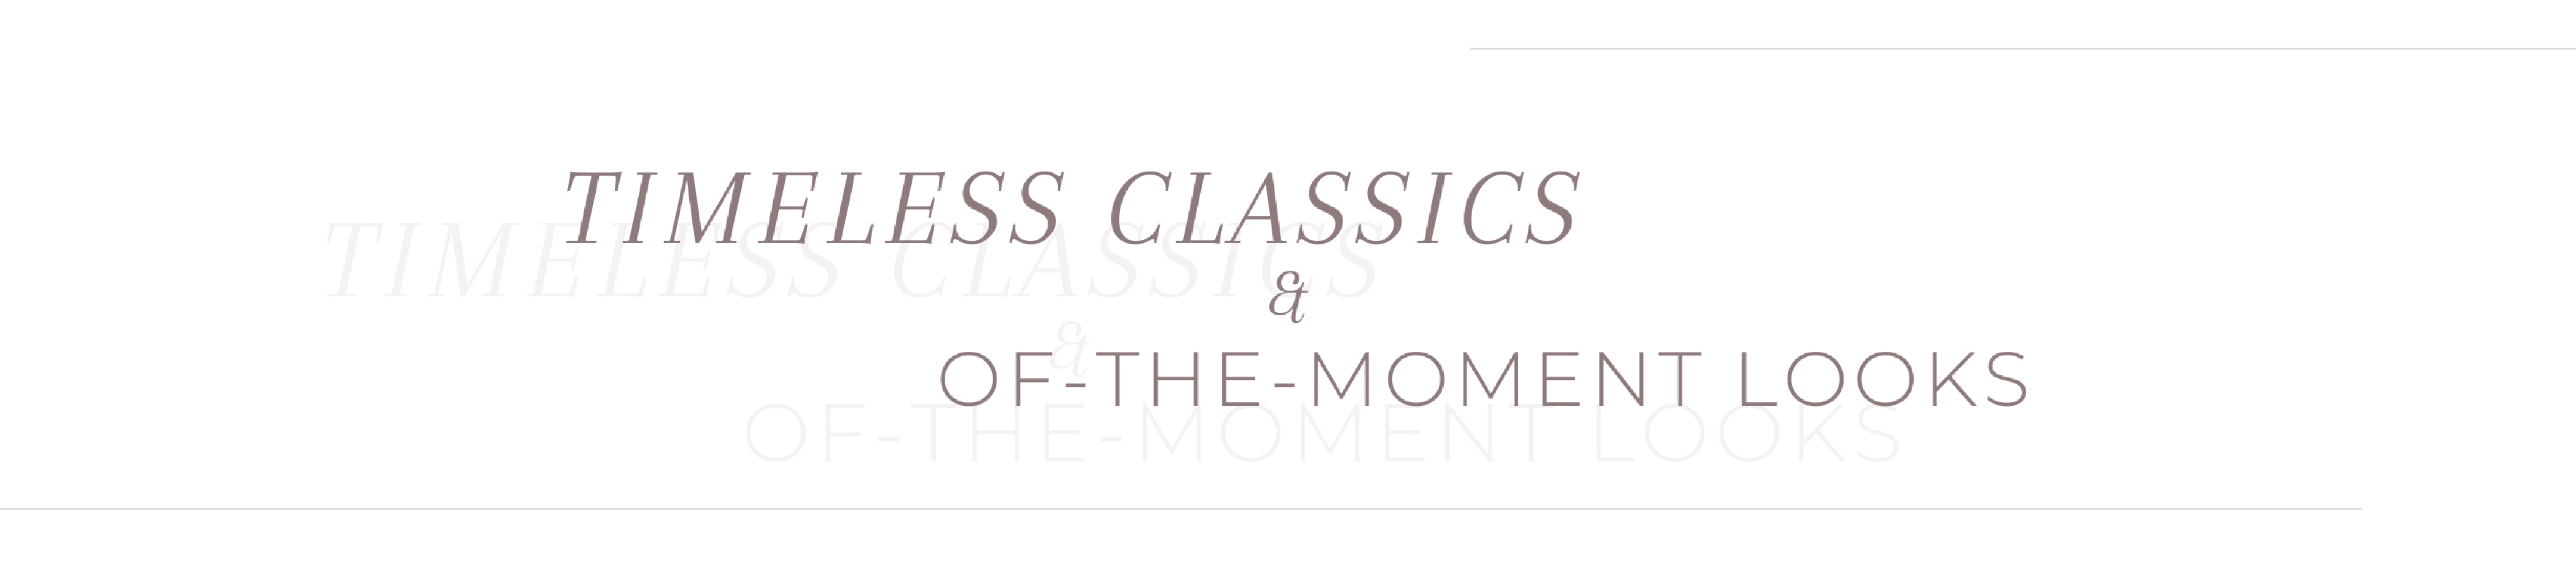 Timeless Classics & Of-The-Moment looks